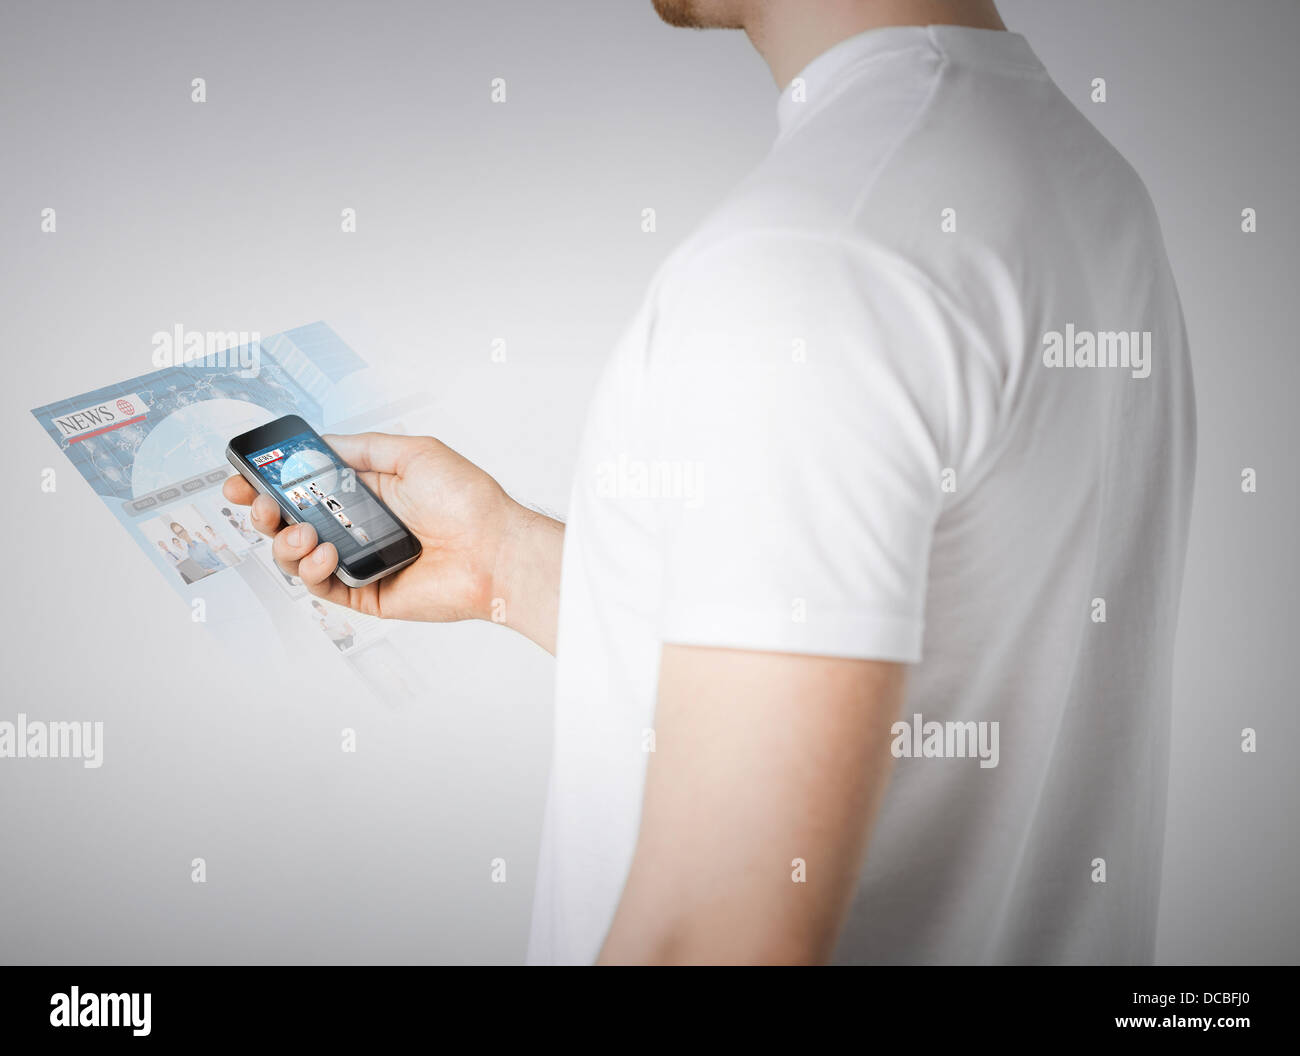 man with smartphone reading news Stock Photo